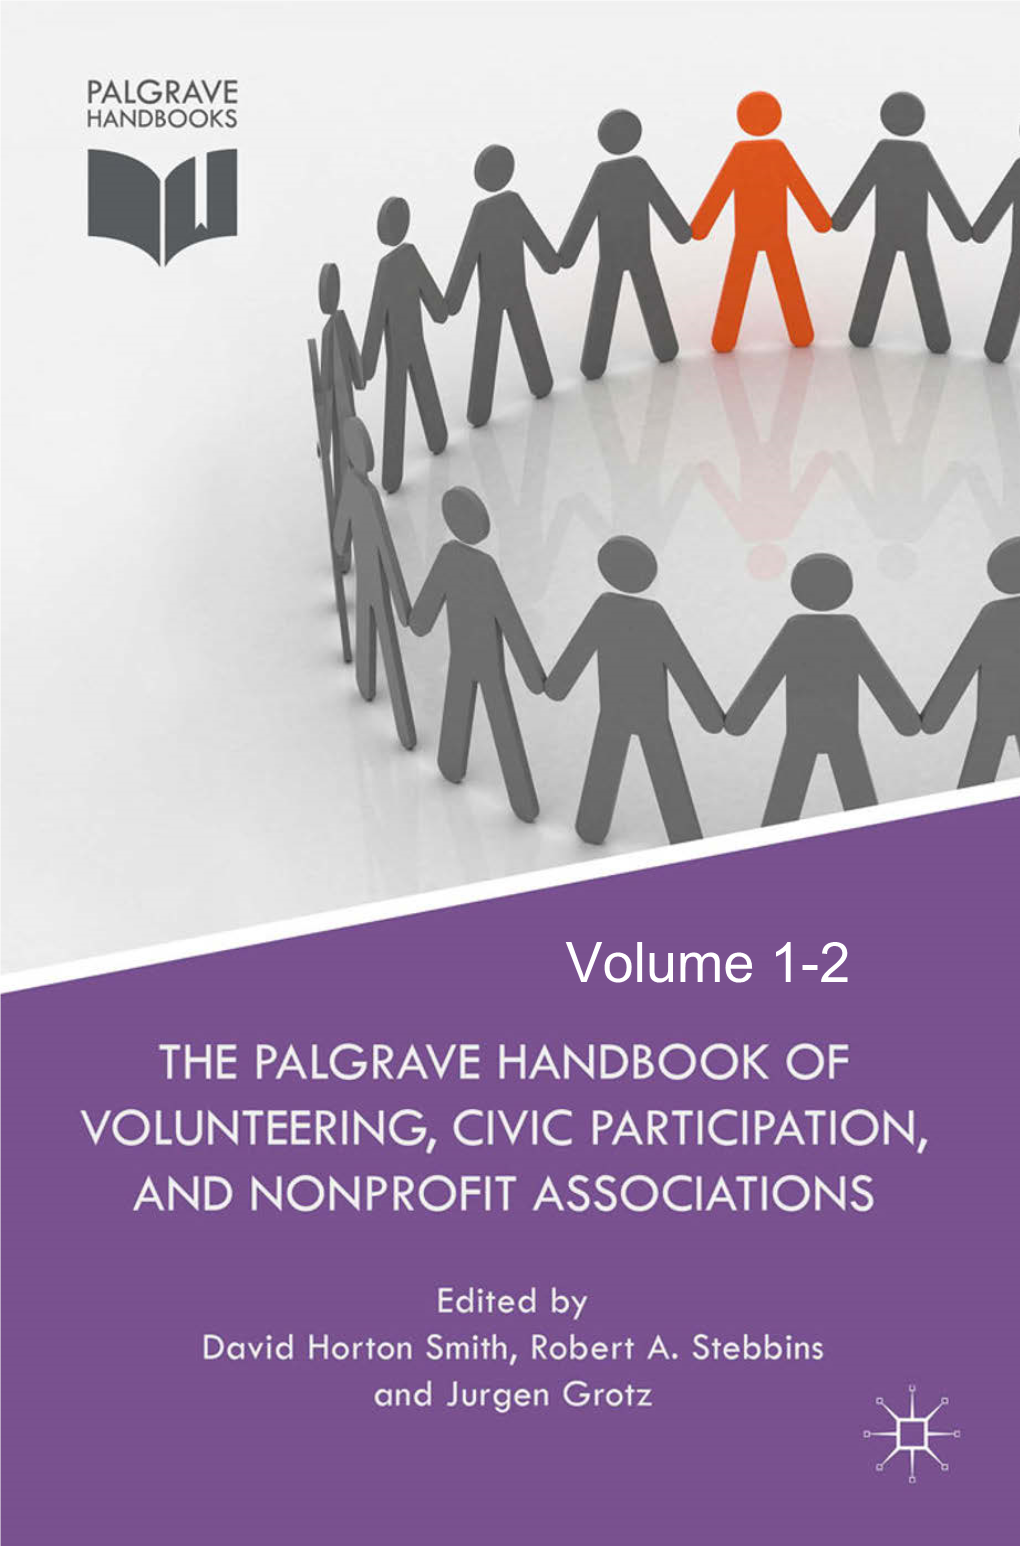 Volume 1-2 the Palgrave Handbook of Volunteering, Civic Participation, and Nonproﬁt Associations Also by David Horton Smith